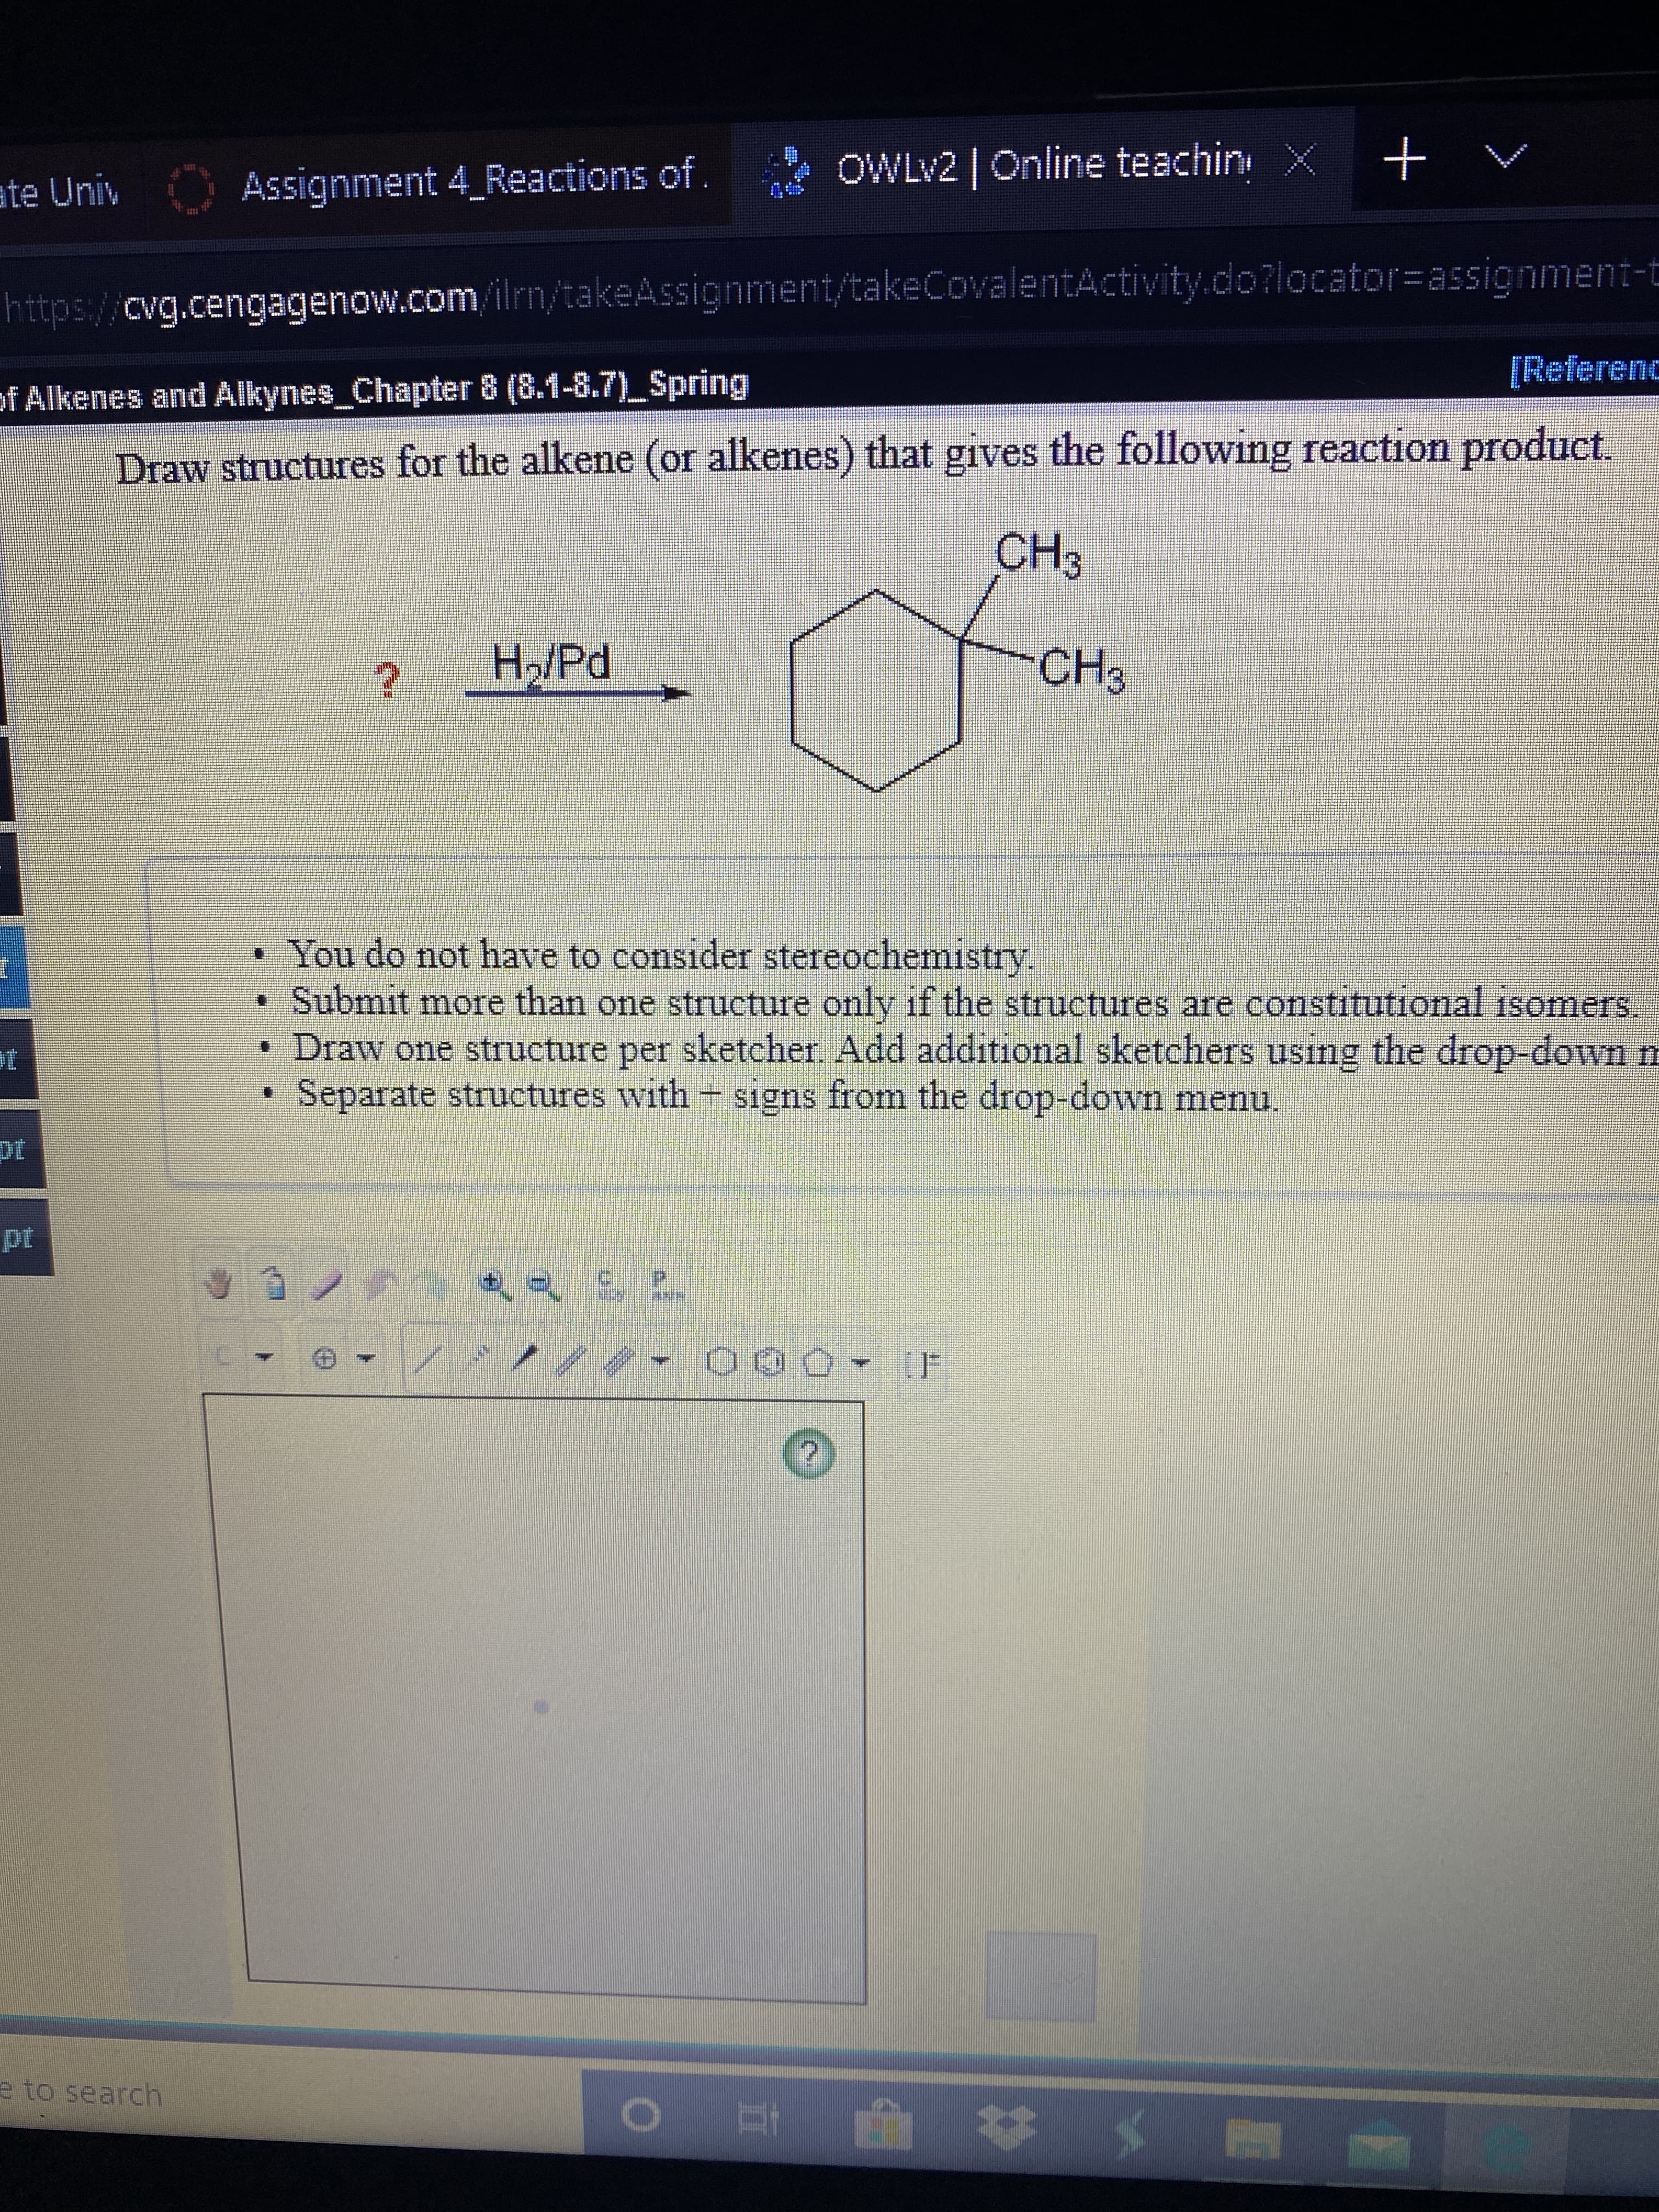 OWLV2 | Online teachin X
ate Univ Assignment 4_Reactions of.
https://cvg.cengagenow.com/ilrn/takeAssignment/takeCovalentActivity.do?locator=assignment-t
[Referenc
of Alkenes and Alkynes_Chapter 8 (8.1-8.7)_Spring
Draw structures for the alkene (or alkenes) that gives the following reaction product.
CH3
H/Pd
CH3
You do not have to consider stereochemistry.
• Submit more than one structure only if the structures are constitutional isomers
• Draw one structure per sketcher. Add additional sketchers using the drop-down m
• Separate structures with + signs from the drop-down menu.
pt
自ノラ
(F
e to search
